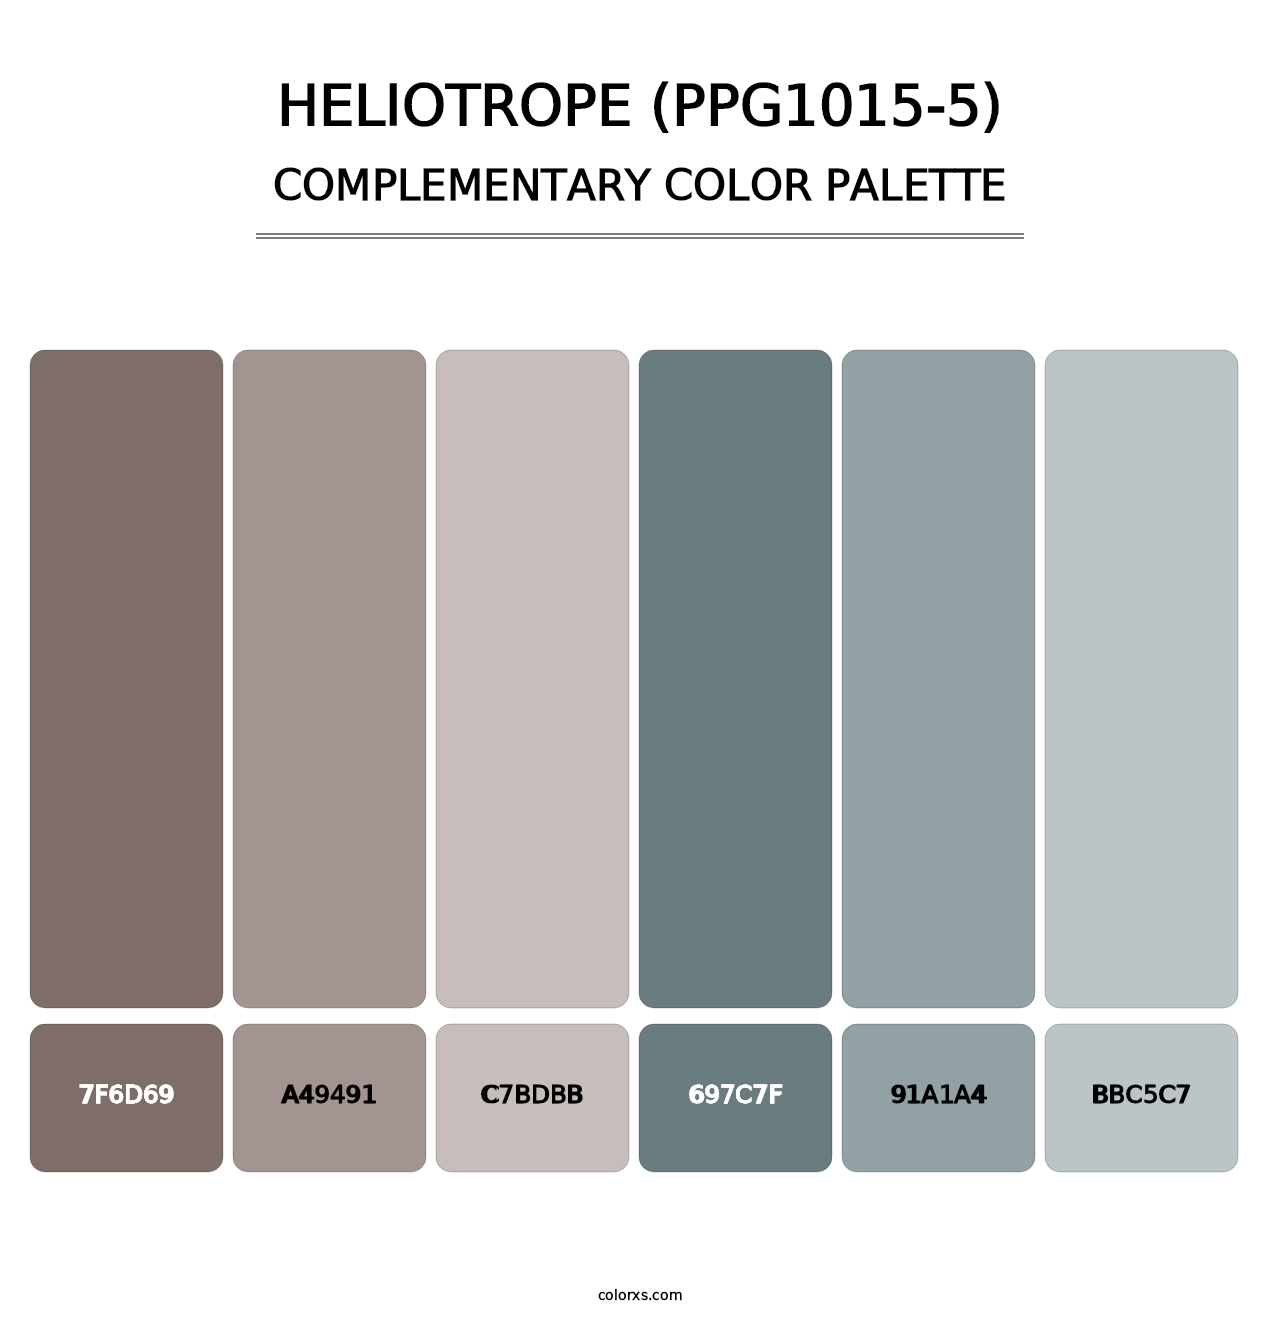 Heliotrope (PPG1015-5) - Complementary Color Palette